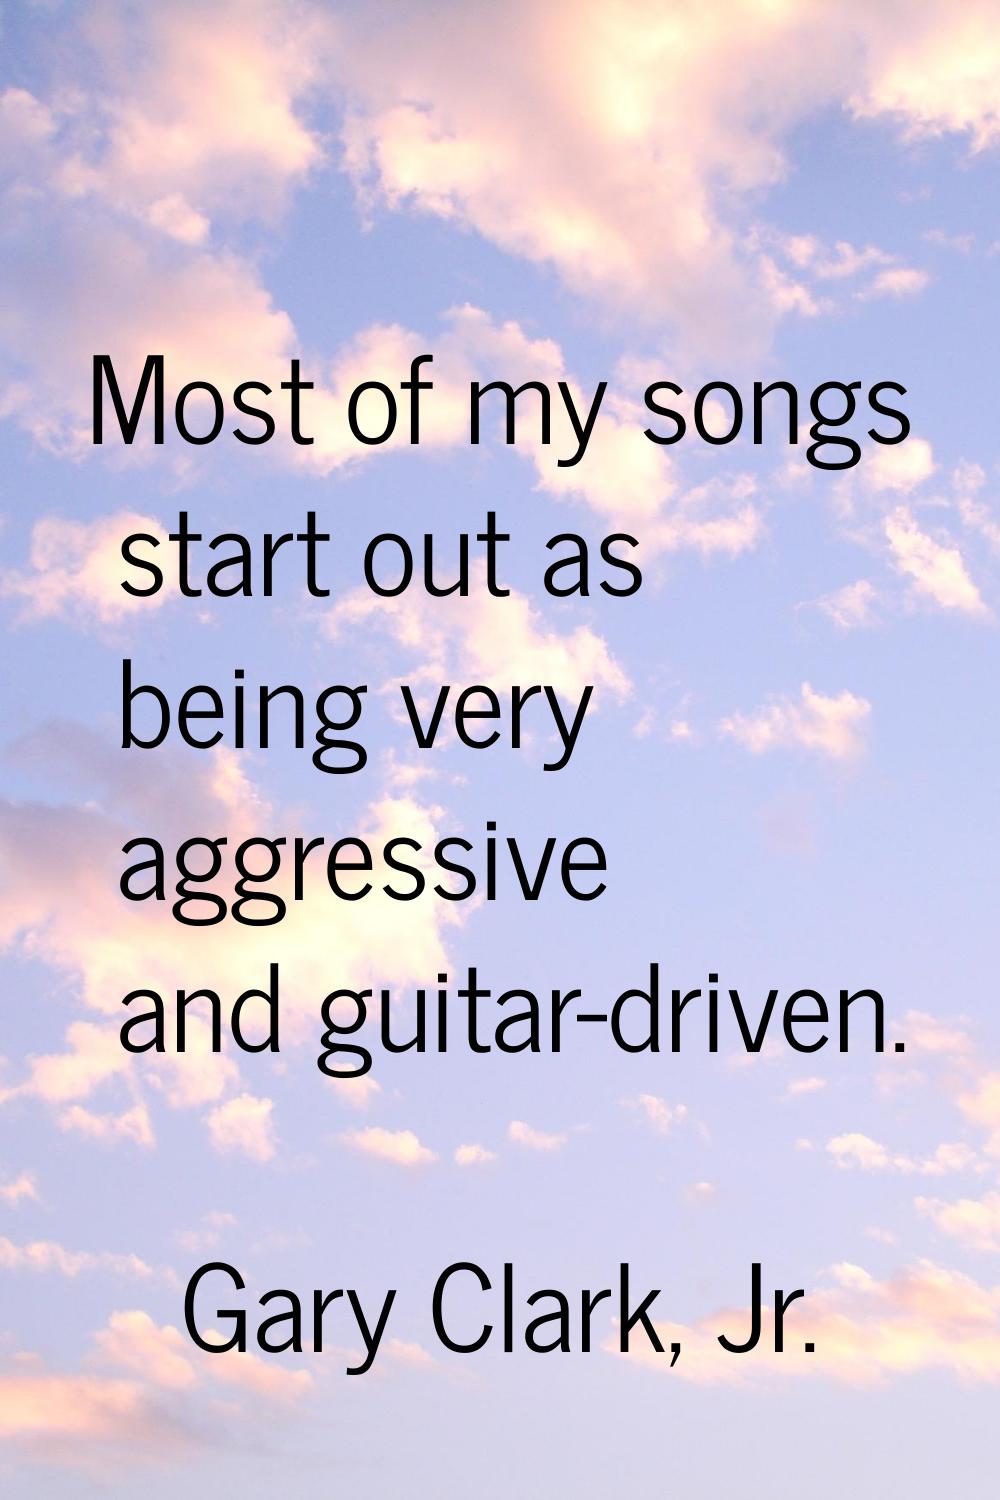 Most of my songs start out as being very aggressive and guitar-driven.